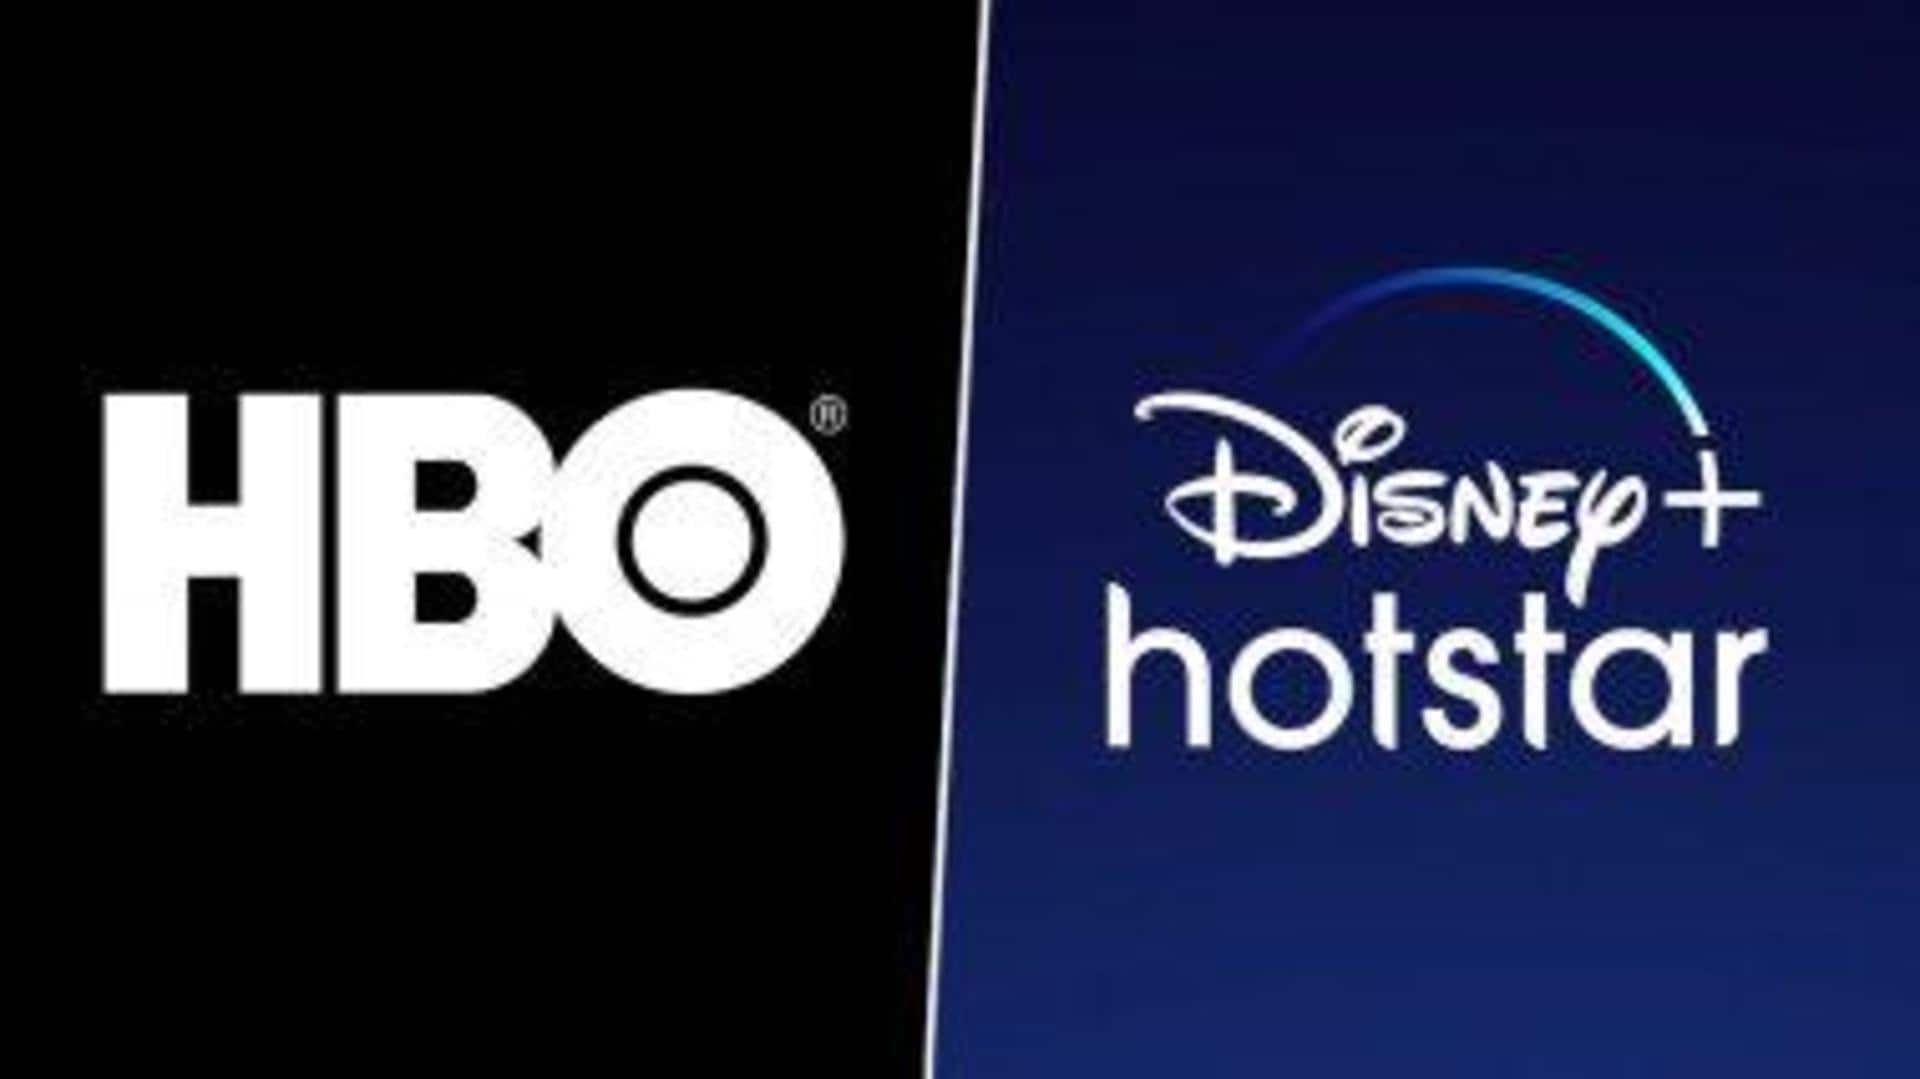 Disney+ Hotstar to remove HBO content by March 31